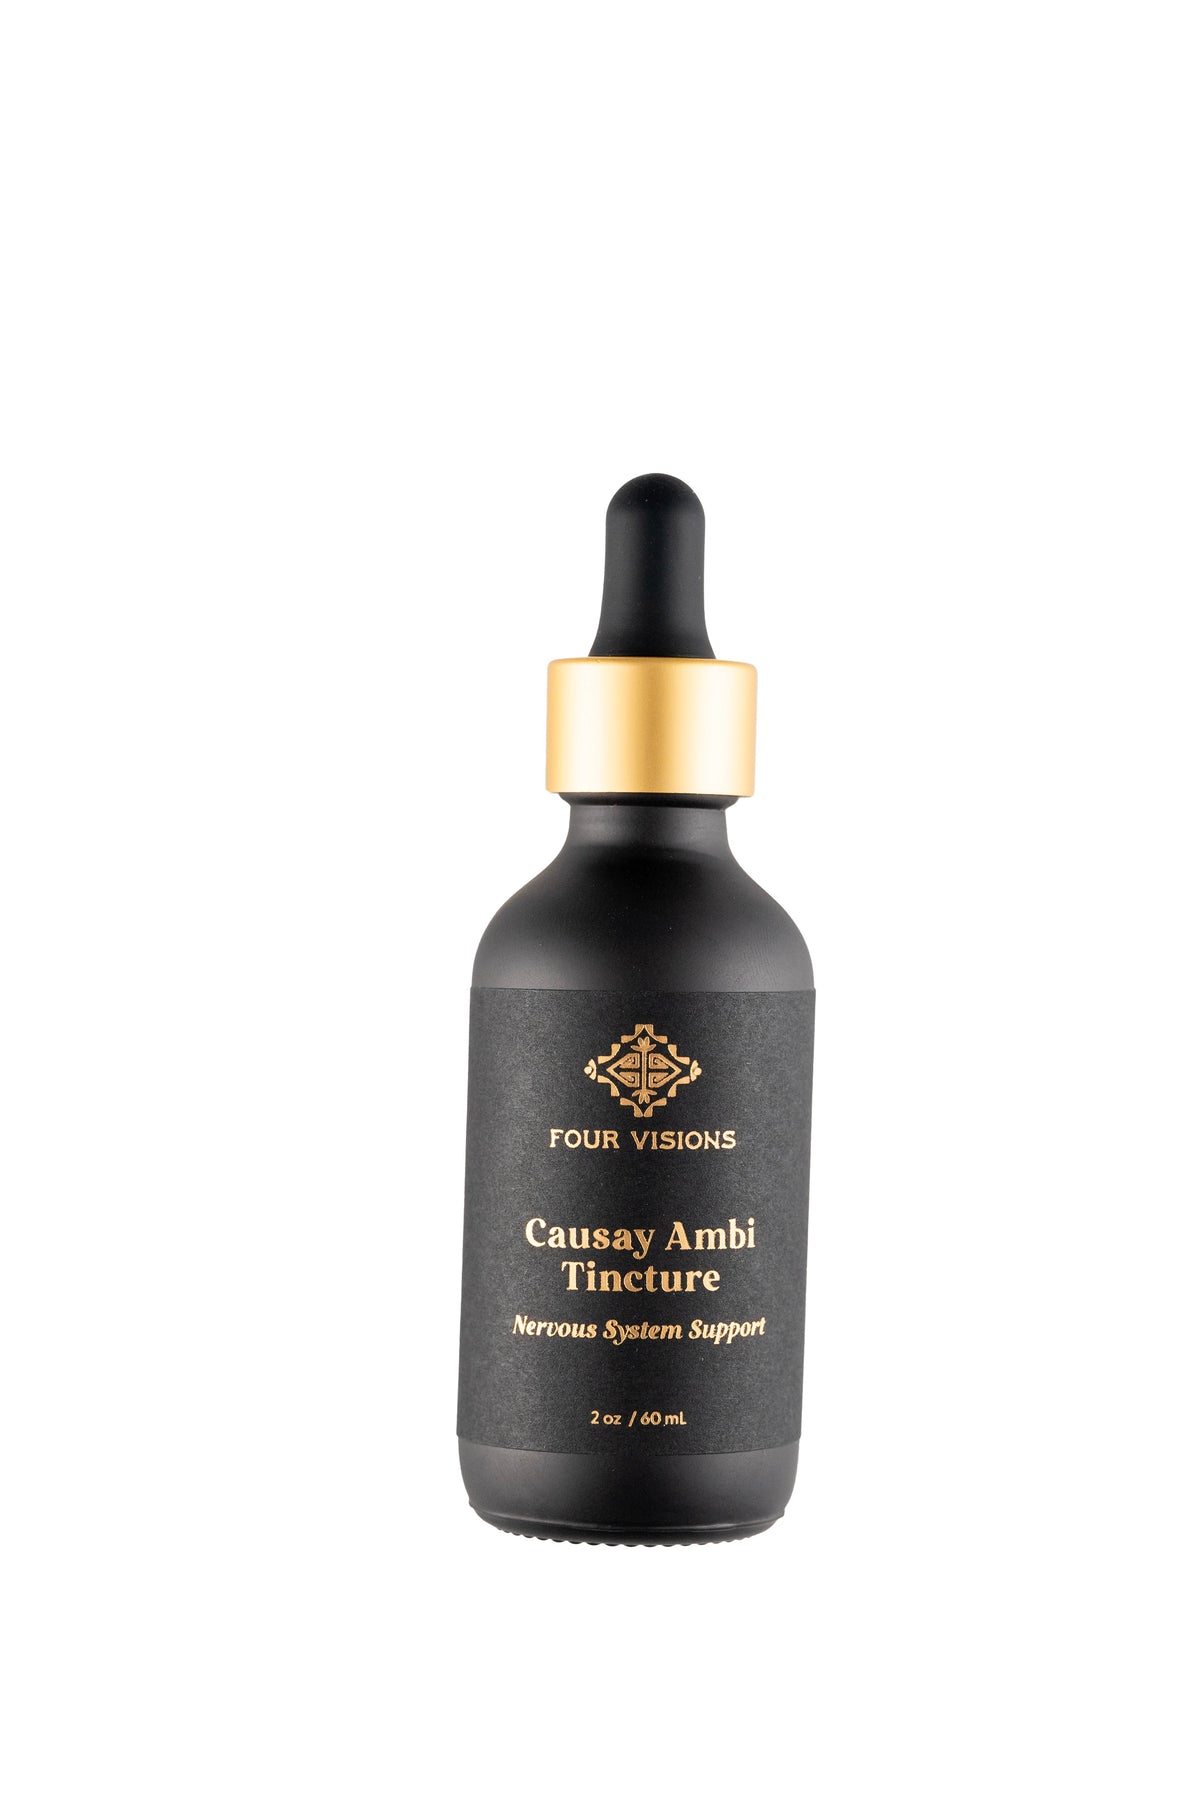 Causay Ambi Nervous System Support Tincture